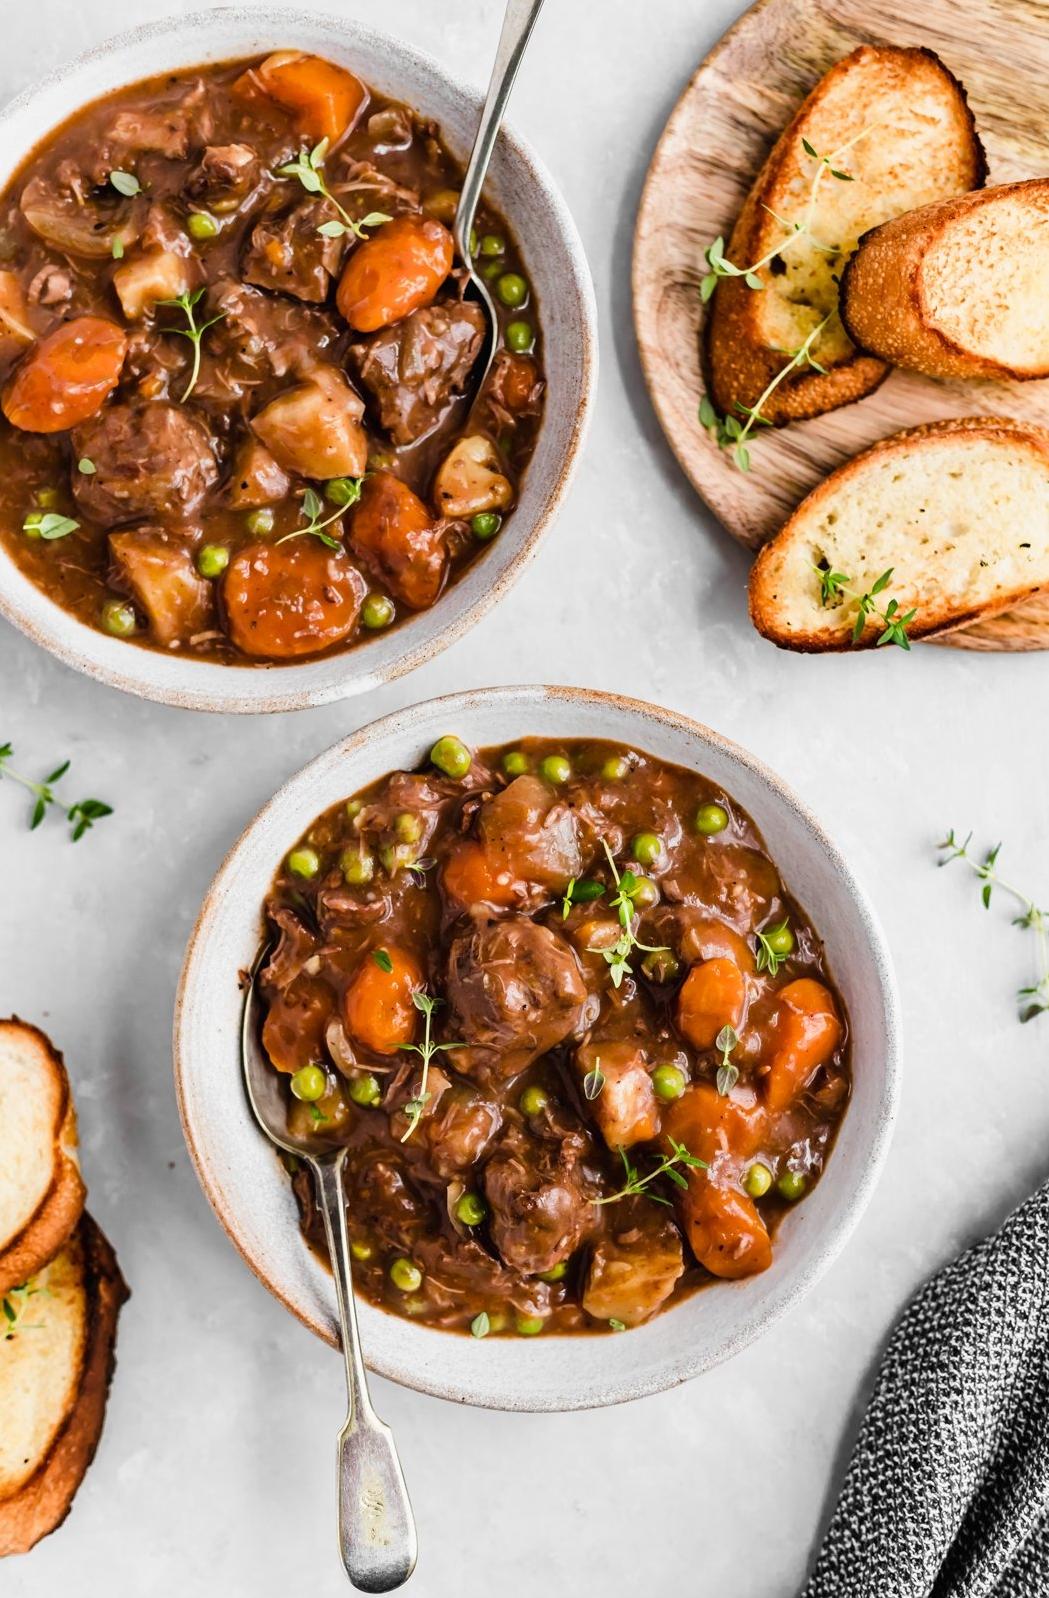  Red wine adds a rich depth of flavor to this stew